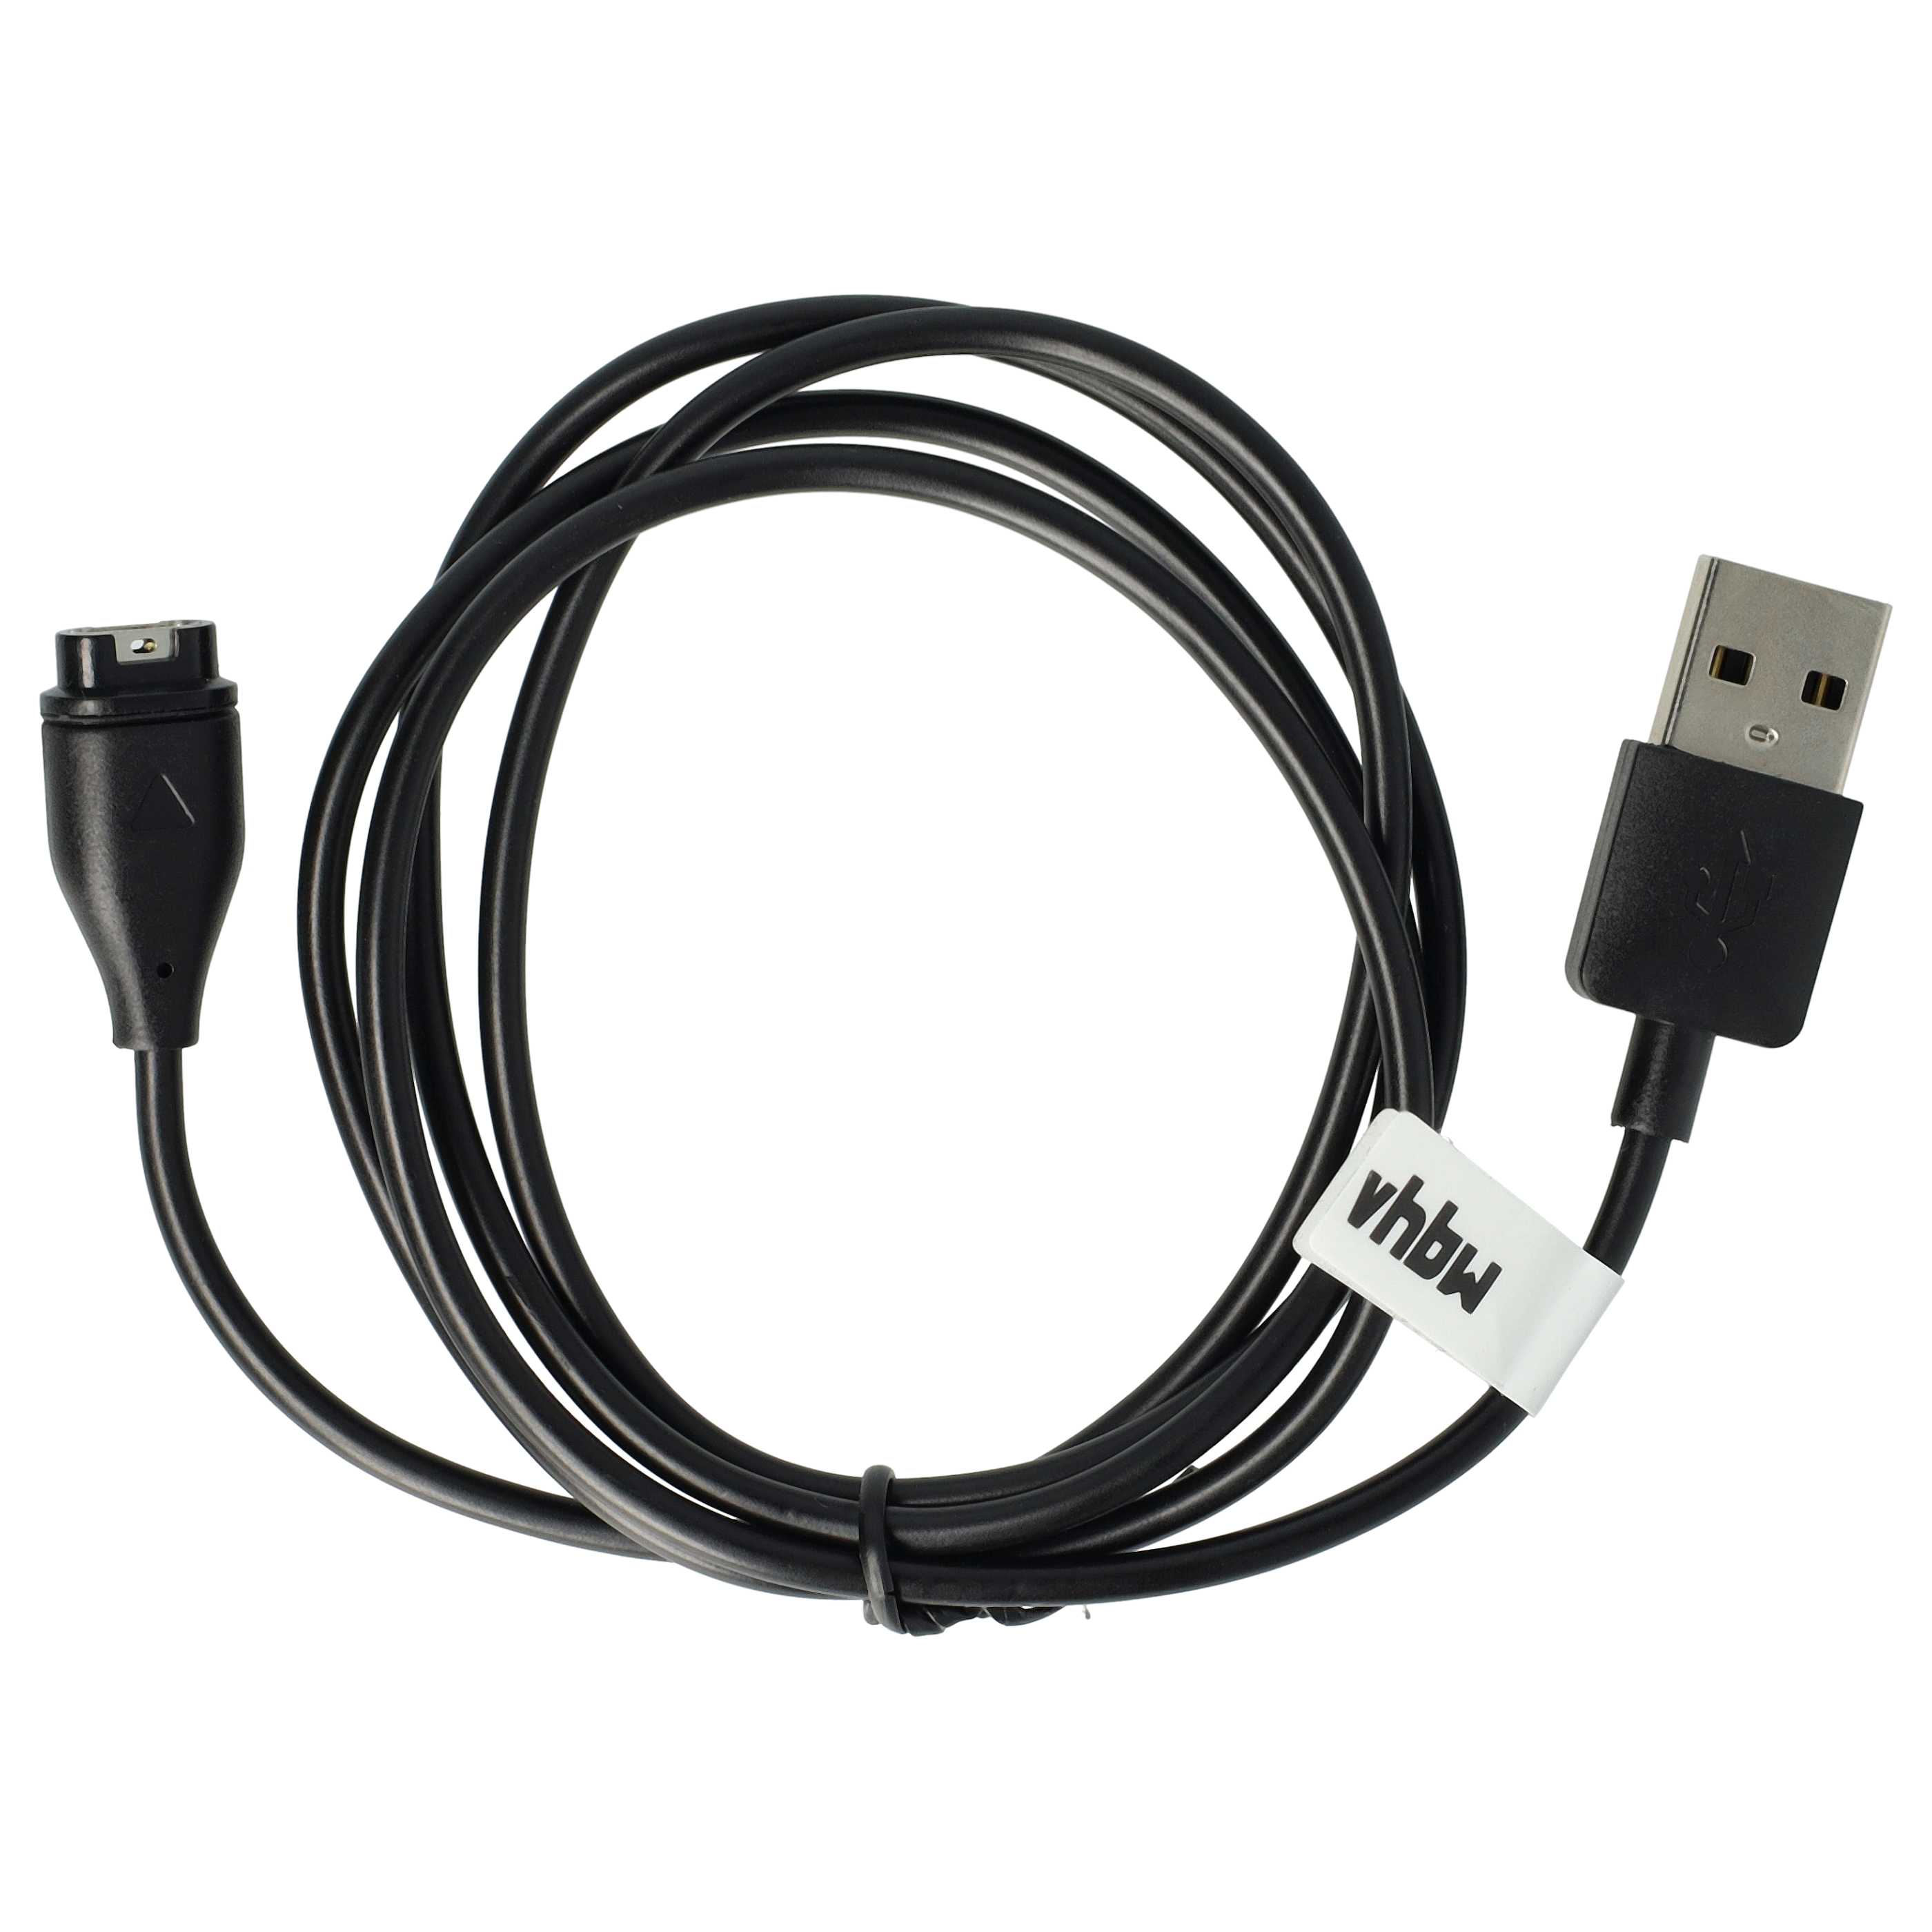 Charging Cable replaces Garmin 8013048 for Garmin Fitness Tracker - USB A Cable, 100cm, black